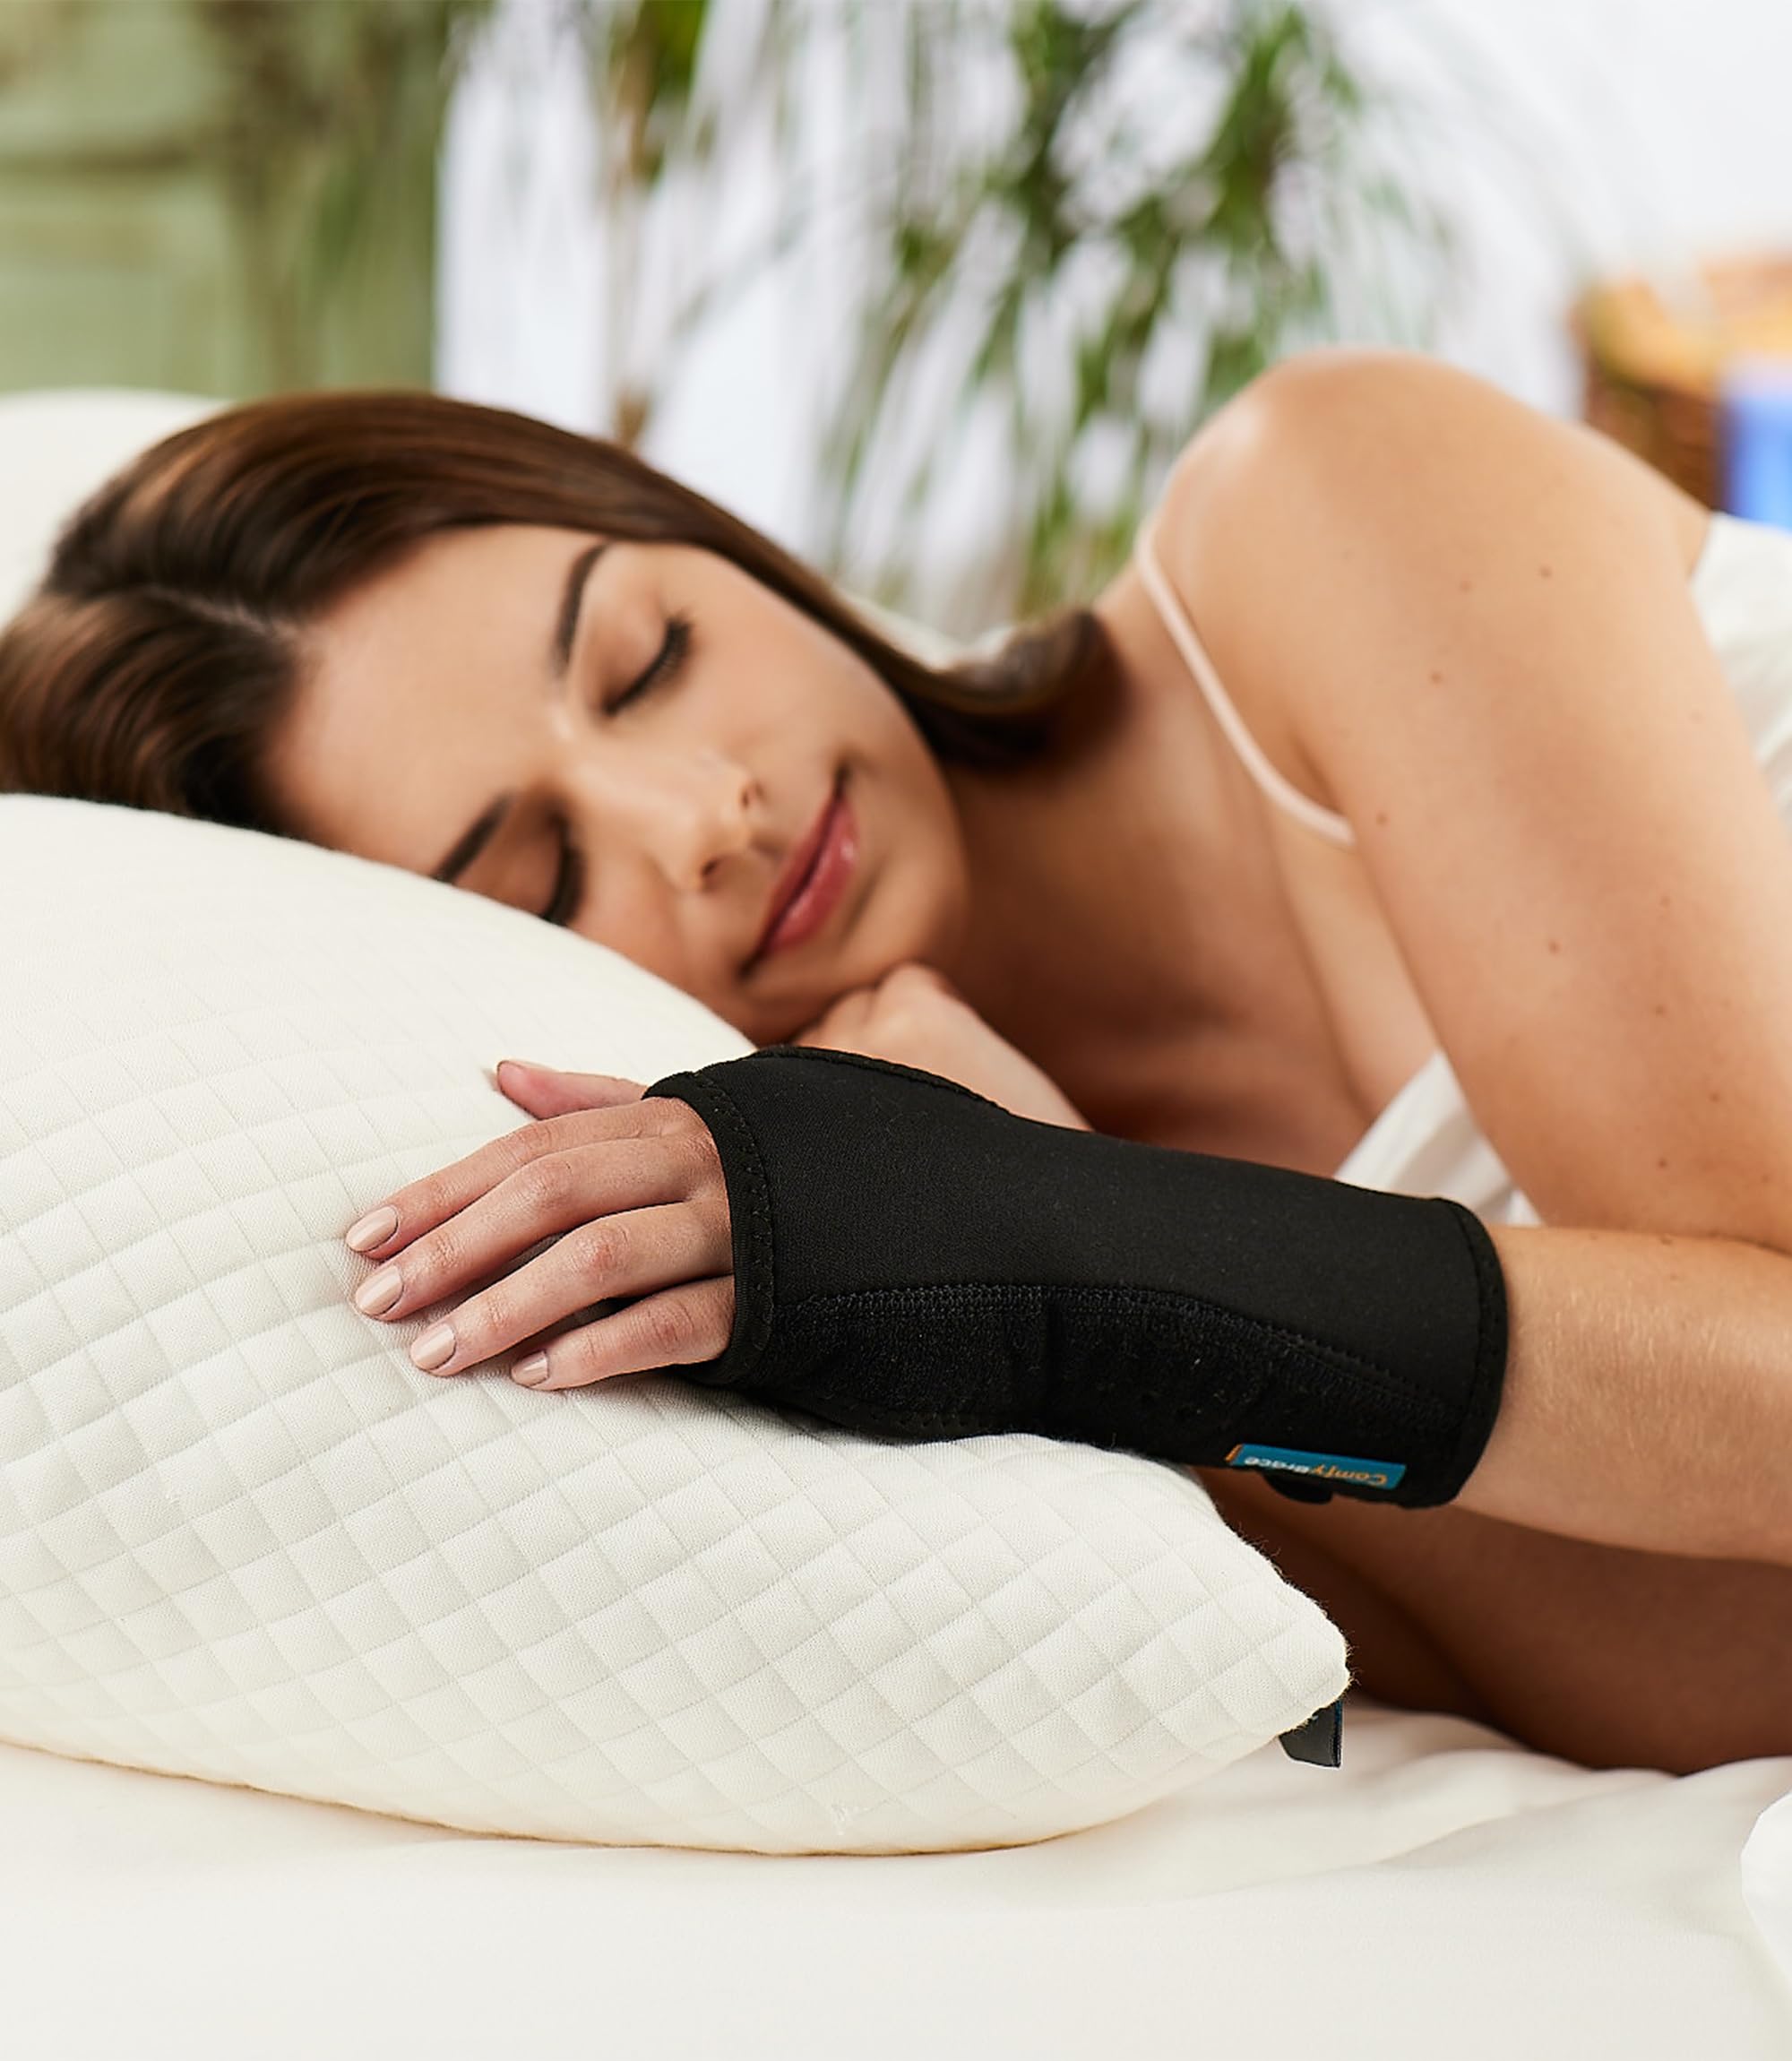 ComfyBrace Night Wrist Sleep Support Brace- Fits Both Hands - Cushioned to Help With Carpal Tunnel and Relieve and Treat Wrist Pain, Adjustable, Fitted